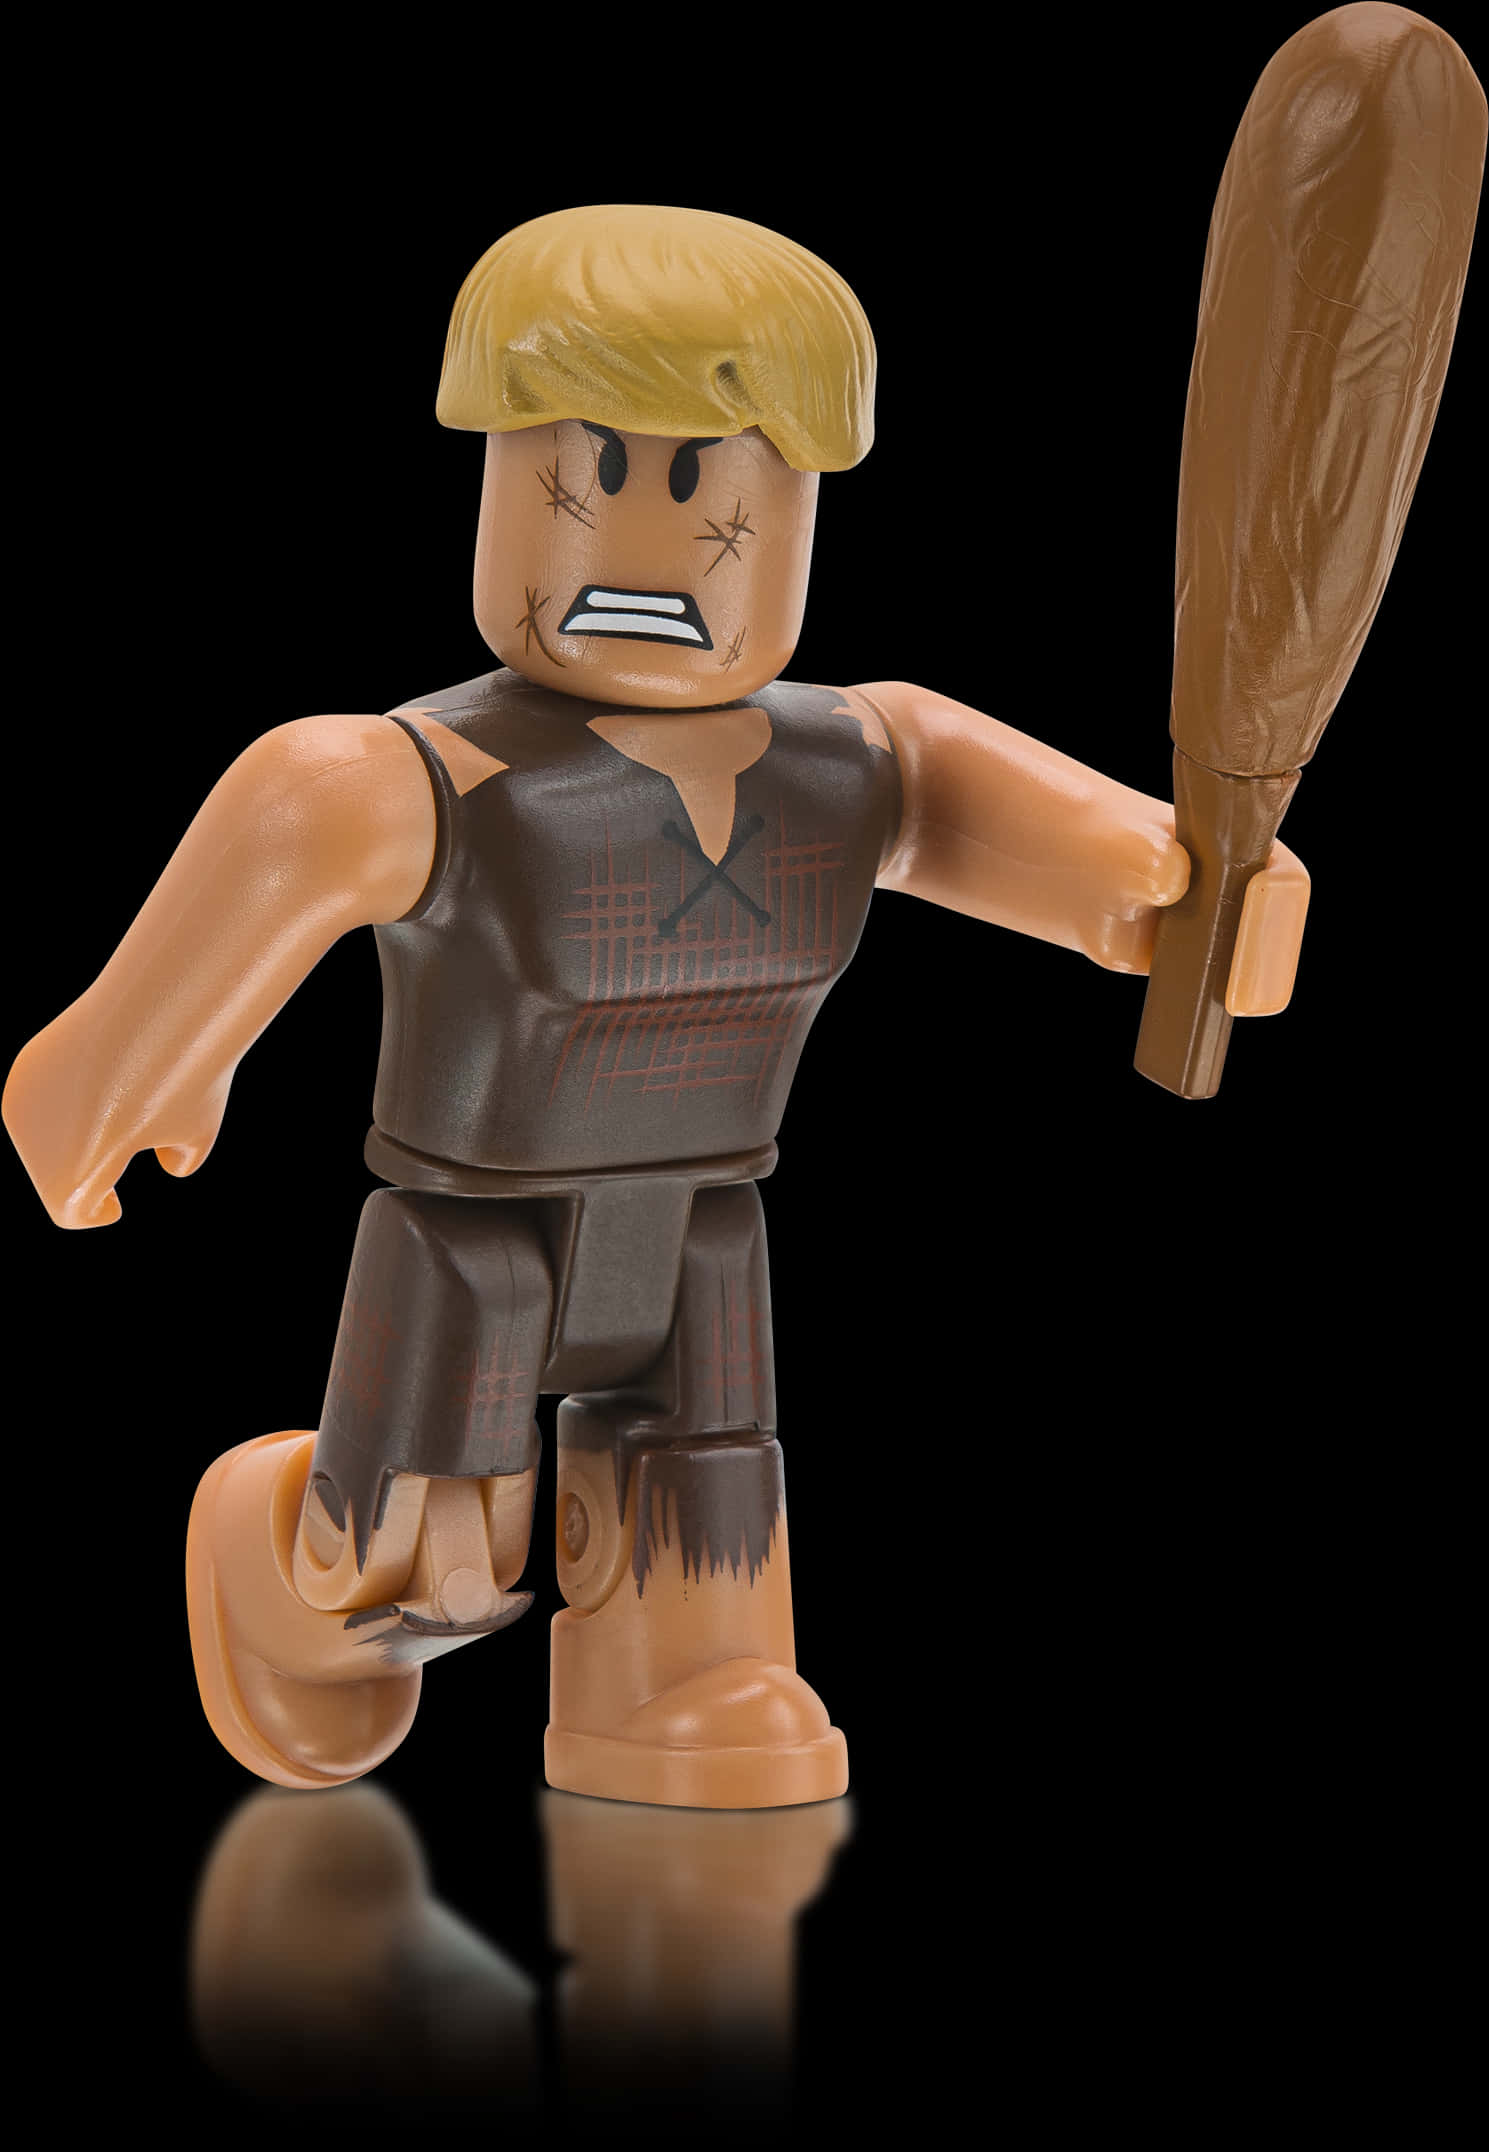 Angry Roblox Figure With Club